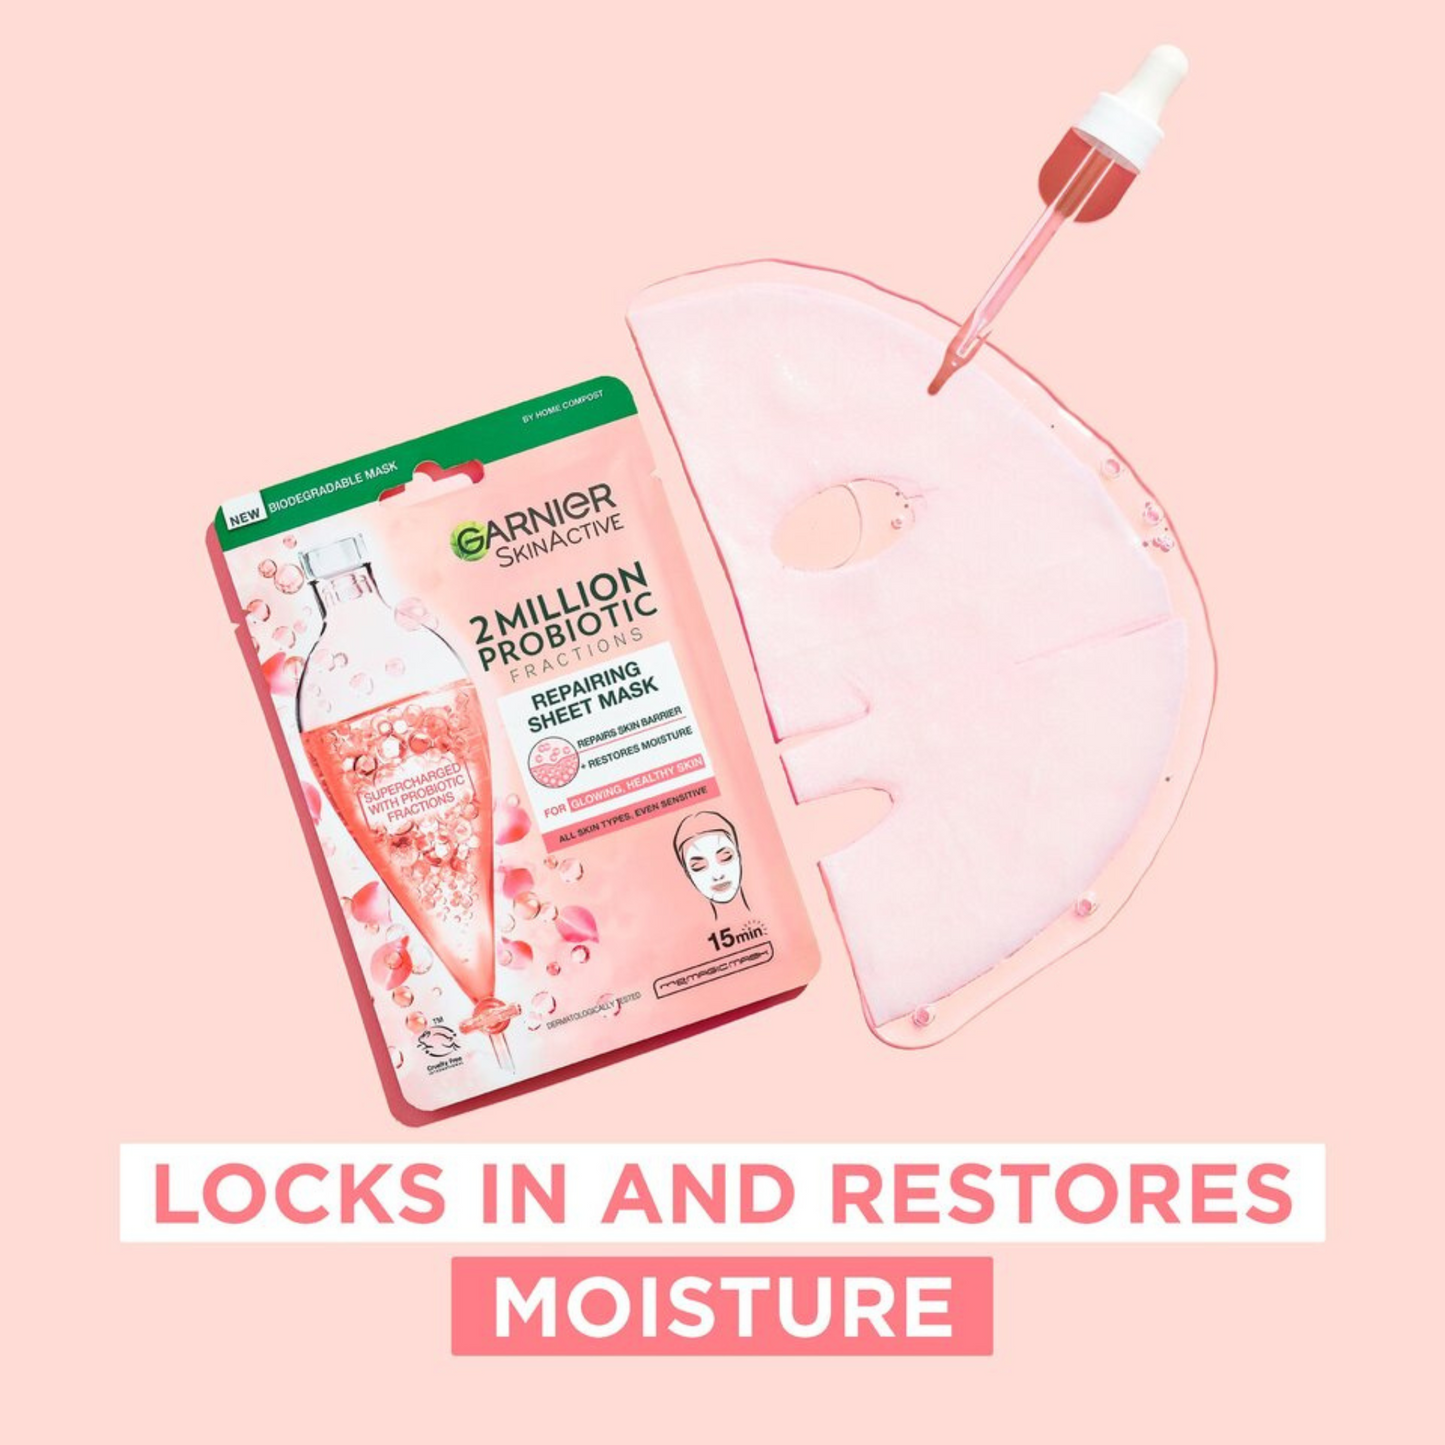 Garnier 2 Million Probiotic Fractions Repairing Face Sheet Mask contains 2 Million Probiotic Fractions known for repairing properties. Repairs skin barrier, restores moisture. Best imported foreign UK English British genuine authentic real skin care skincare beauty cheap price in Dhaka Chittagong Sylhet Bangladesh.